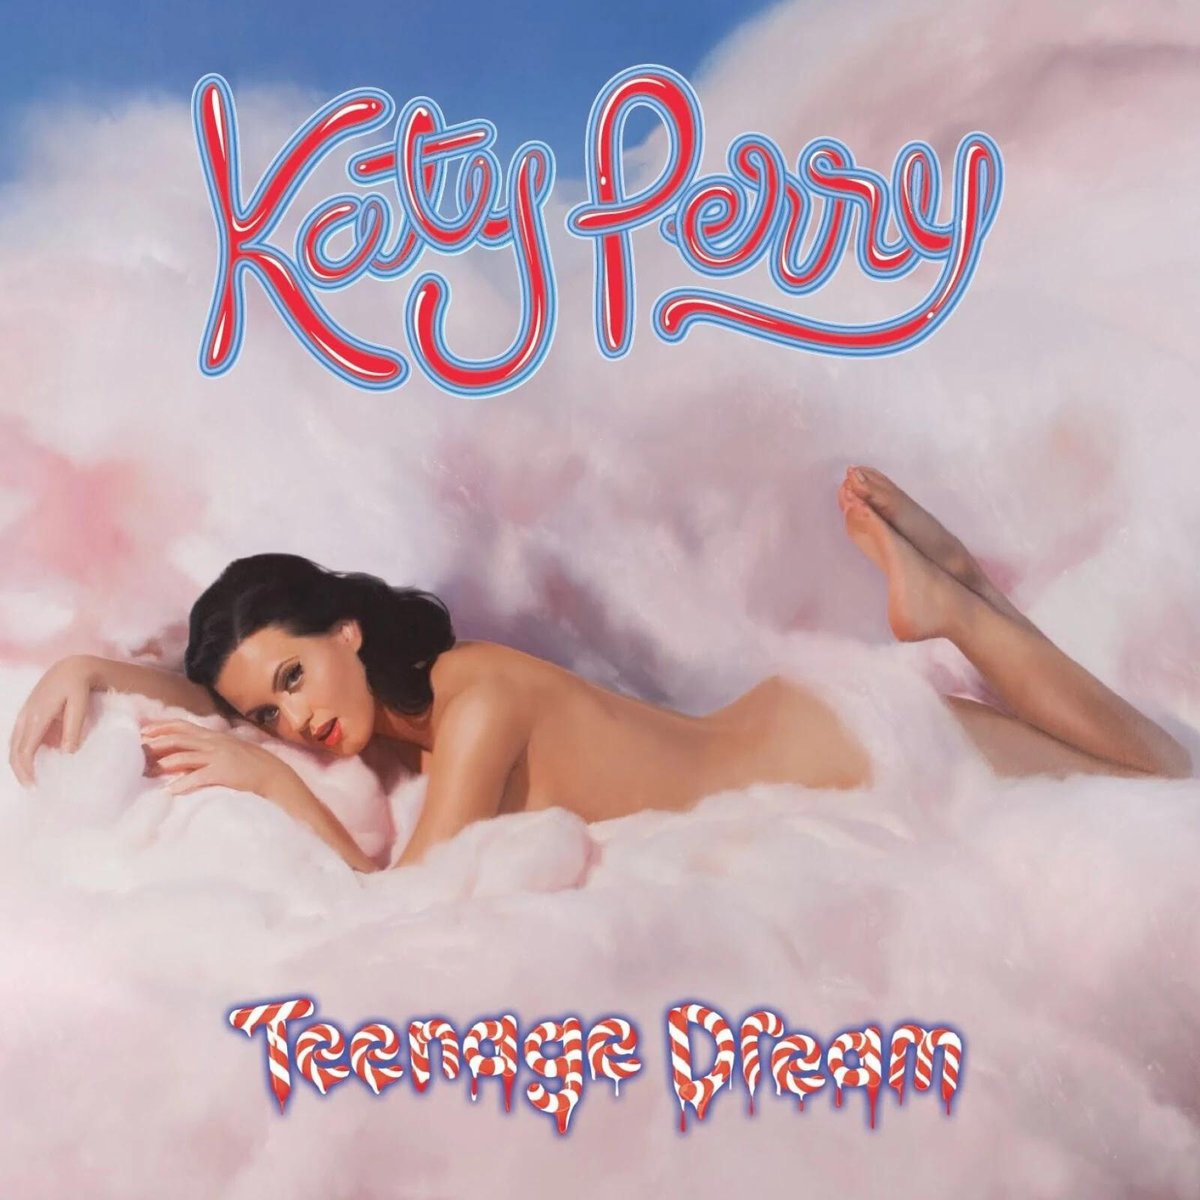 Don't ever look back...unless it's towards Katy Perry's (@katyperry) iconic 2010 album 🍭🍬

Following her #CoronationConcert show-stopper, Teenage Dream returns to the Top 40 for the first time in a decade: officialcharts.com/p/39249

#KatyPerry